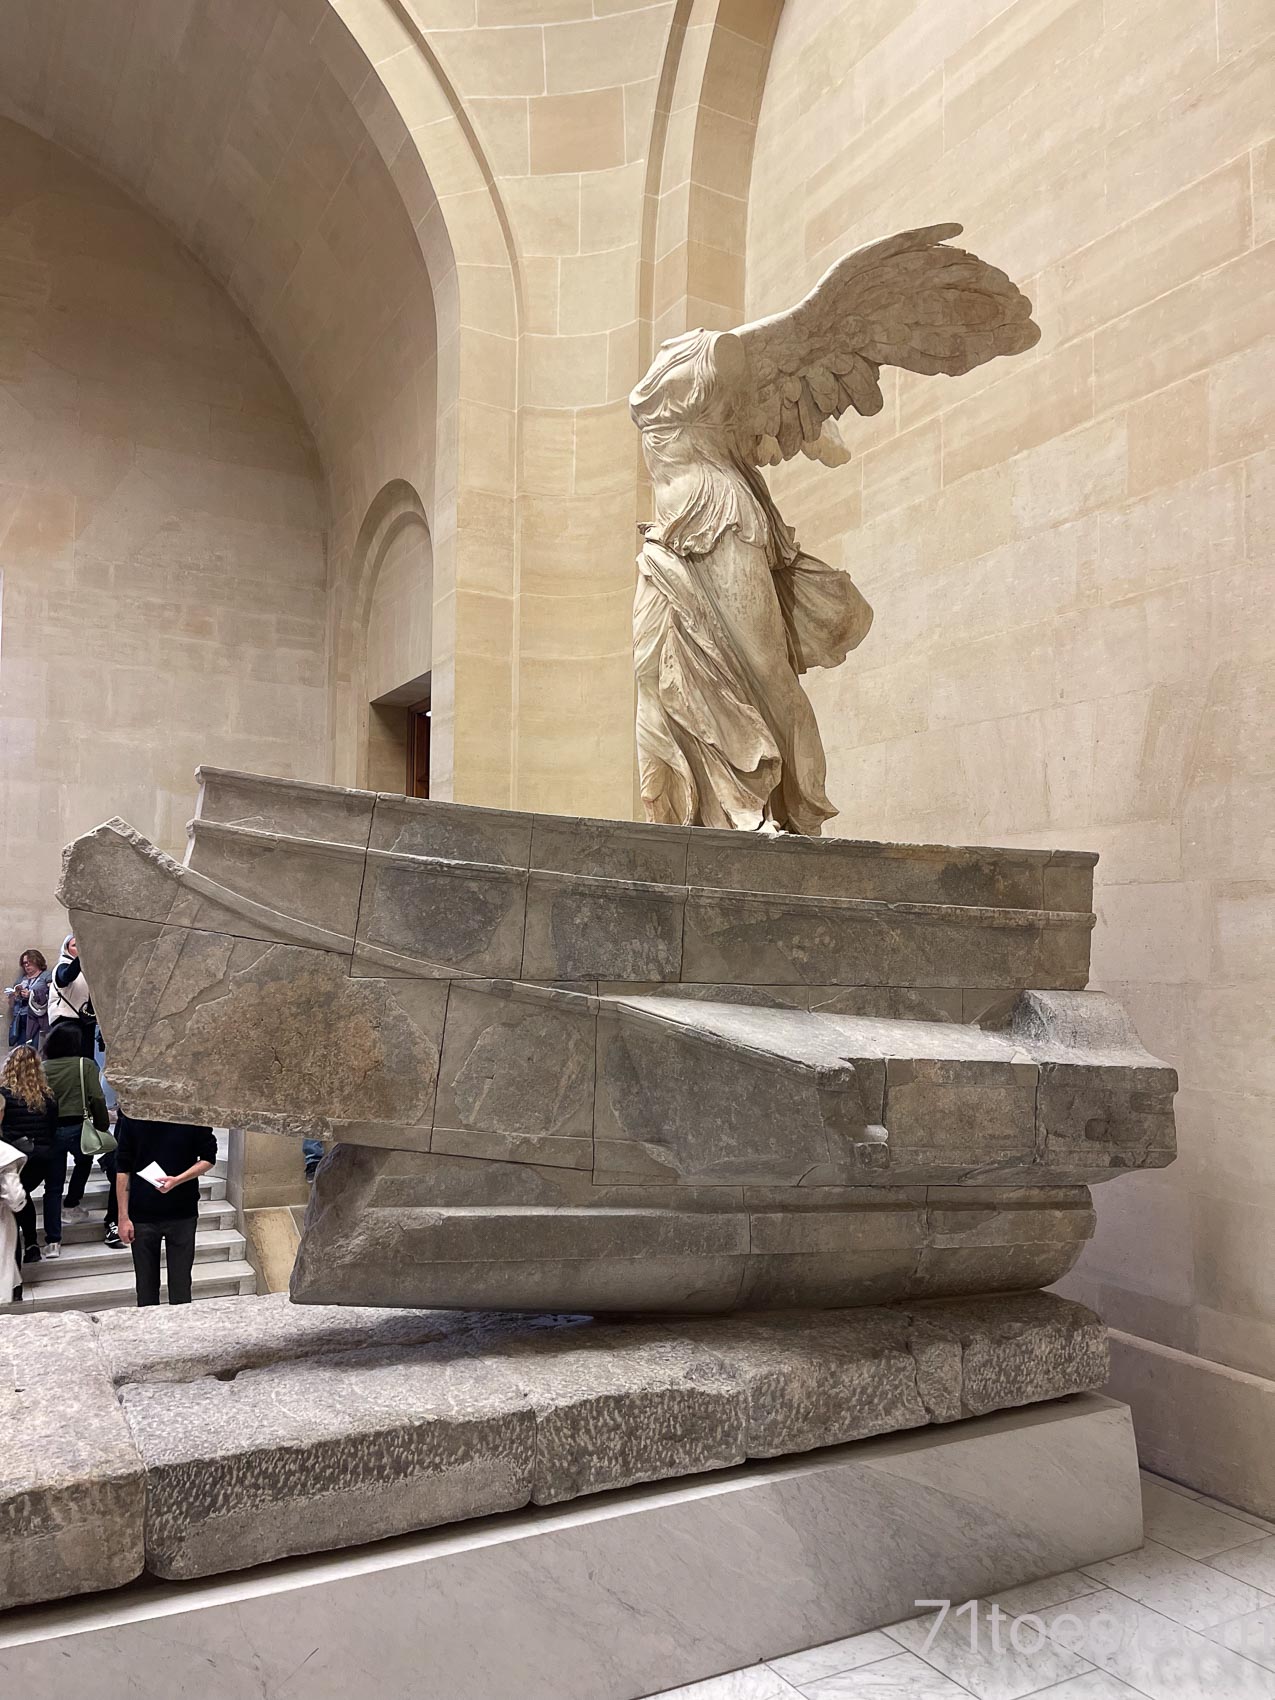 the statue of Winged Victory is such a good symbol of strong women